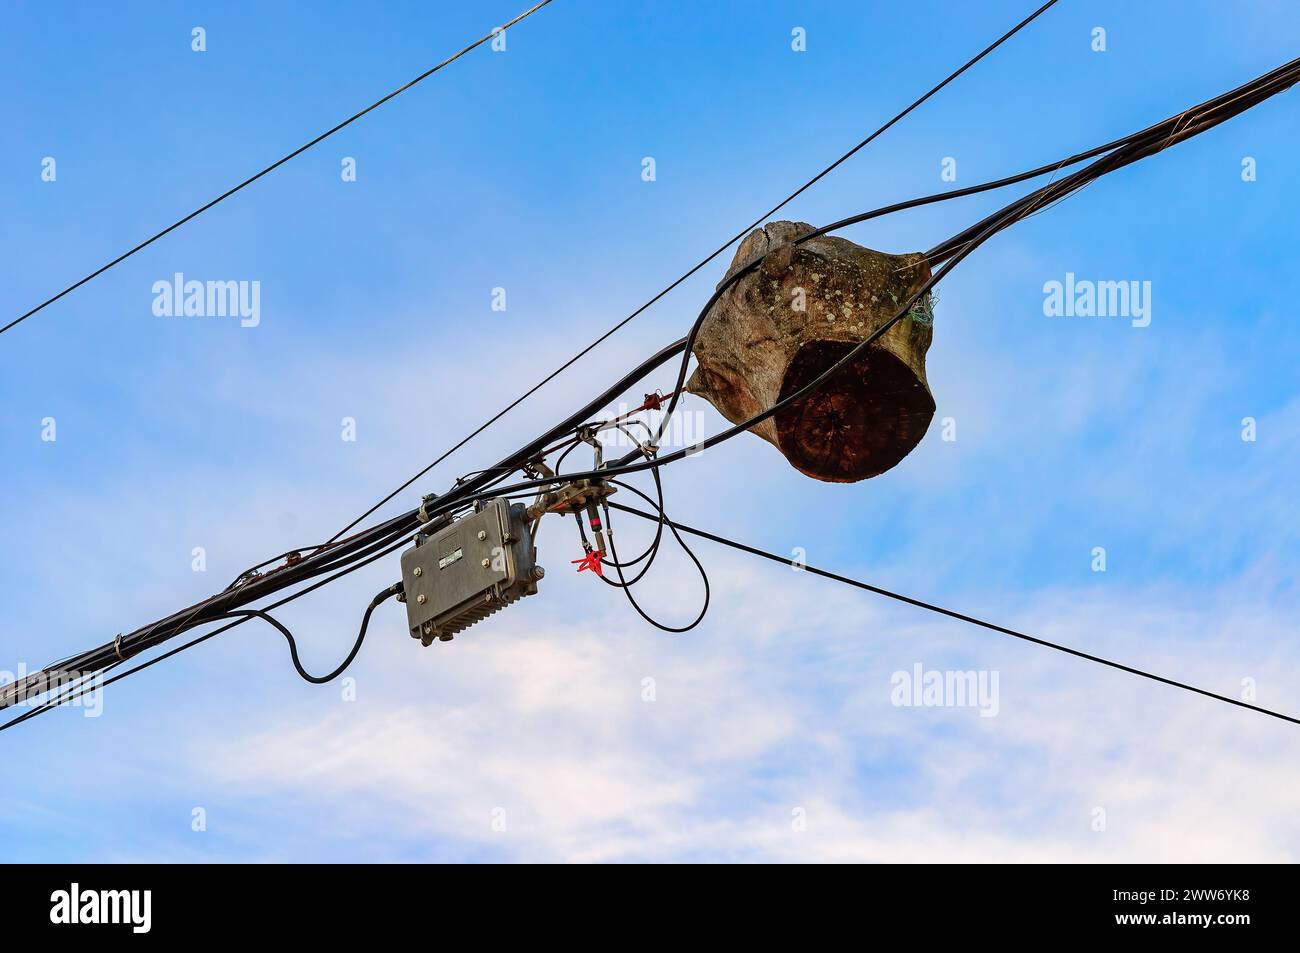 Protection of electric and communication cables or wires, Toronto, Canada Stock Photo